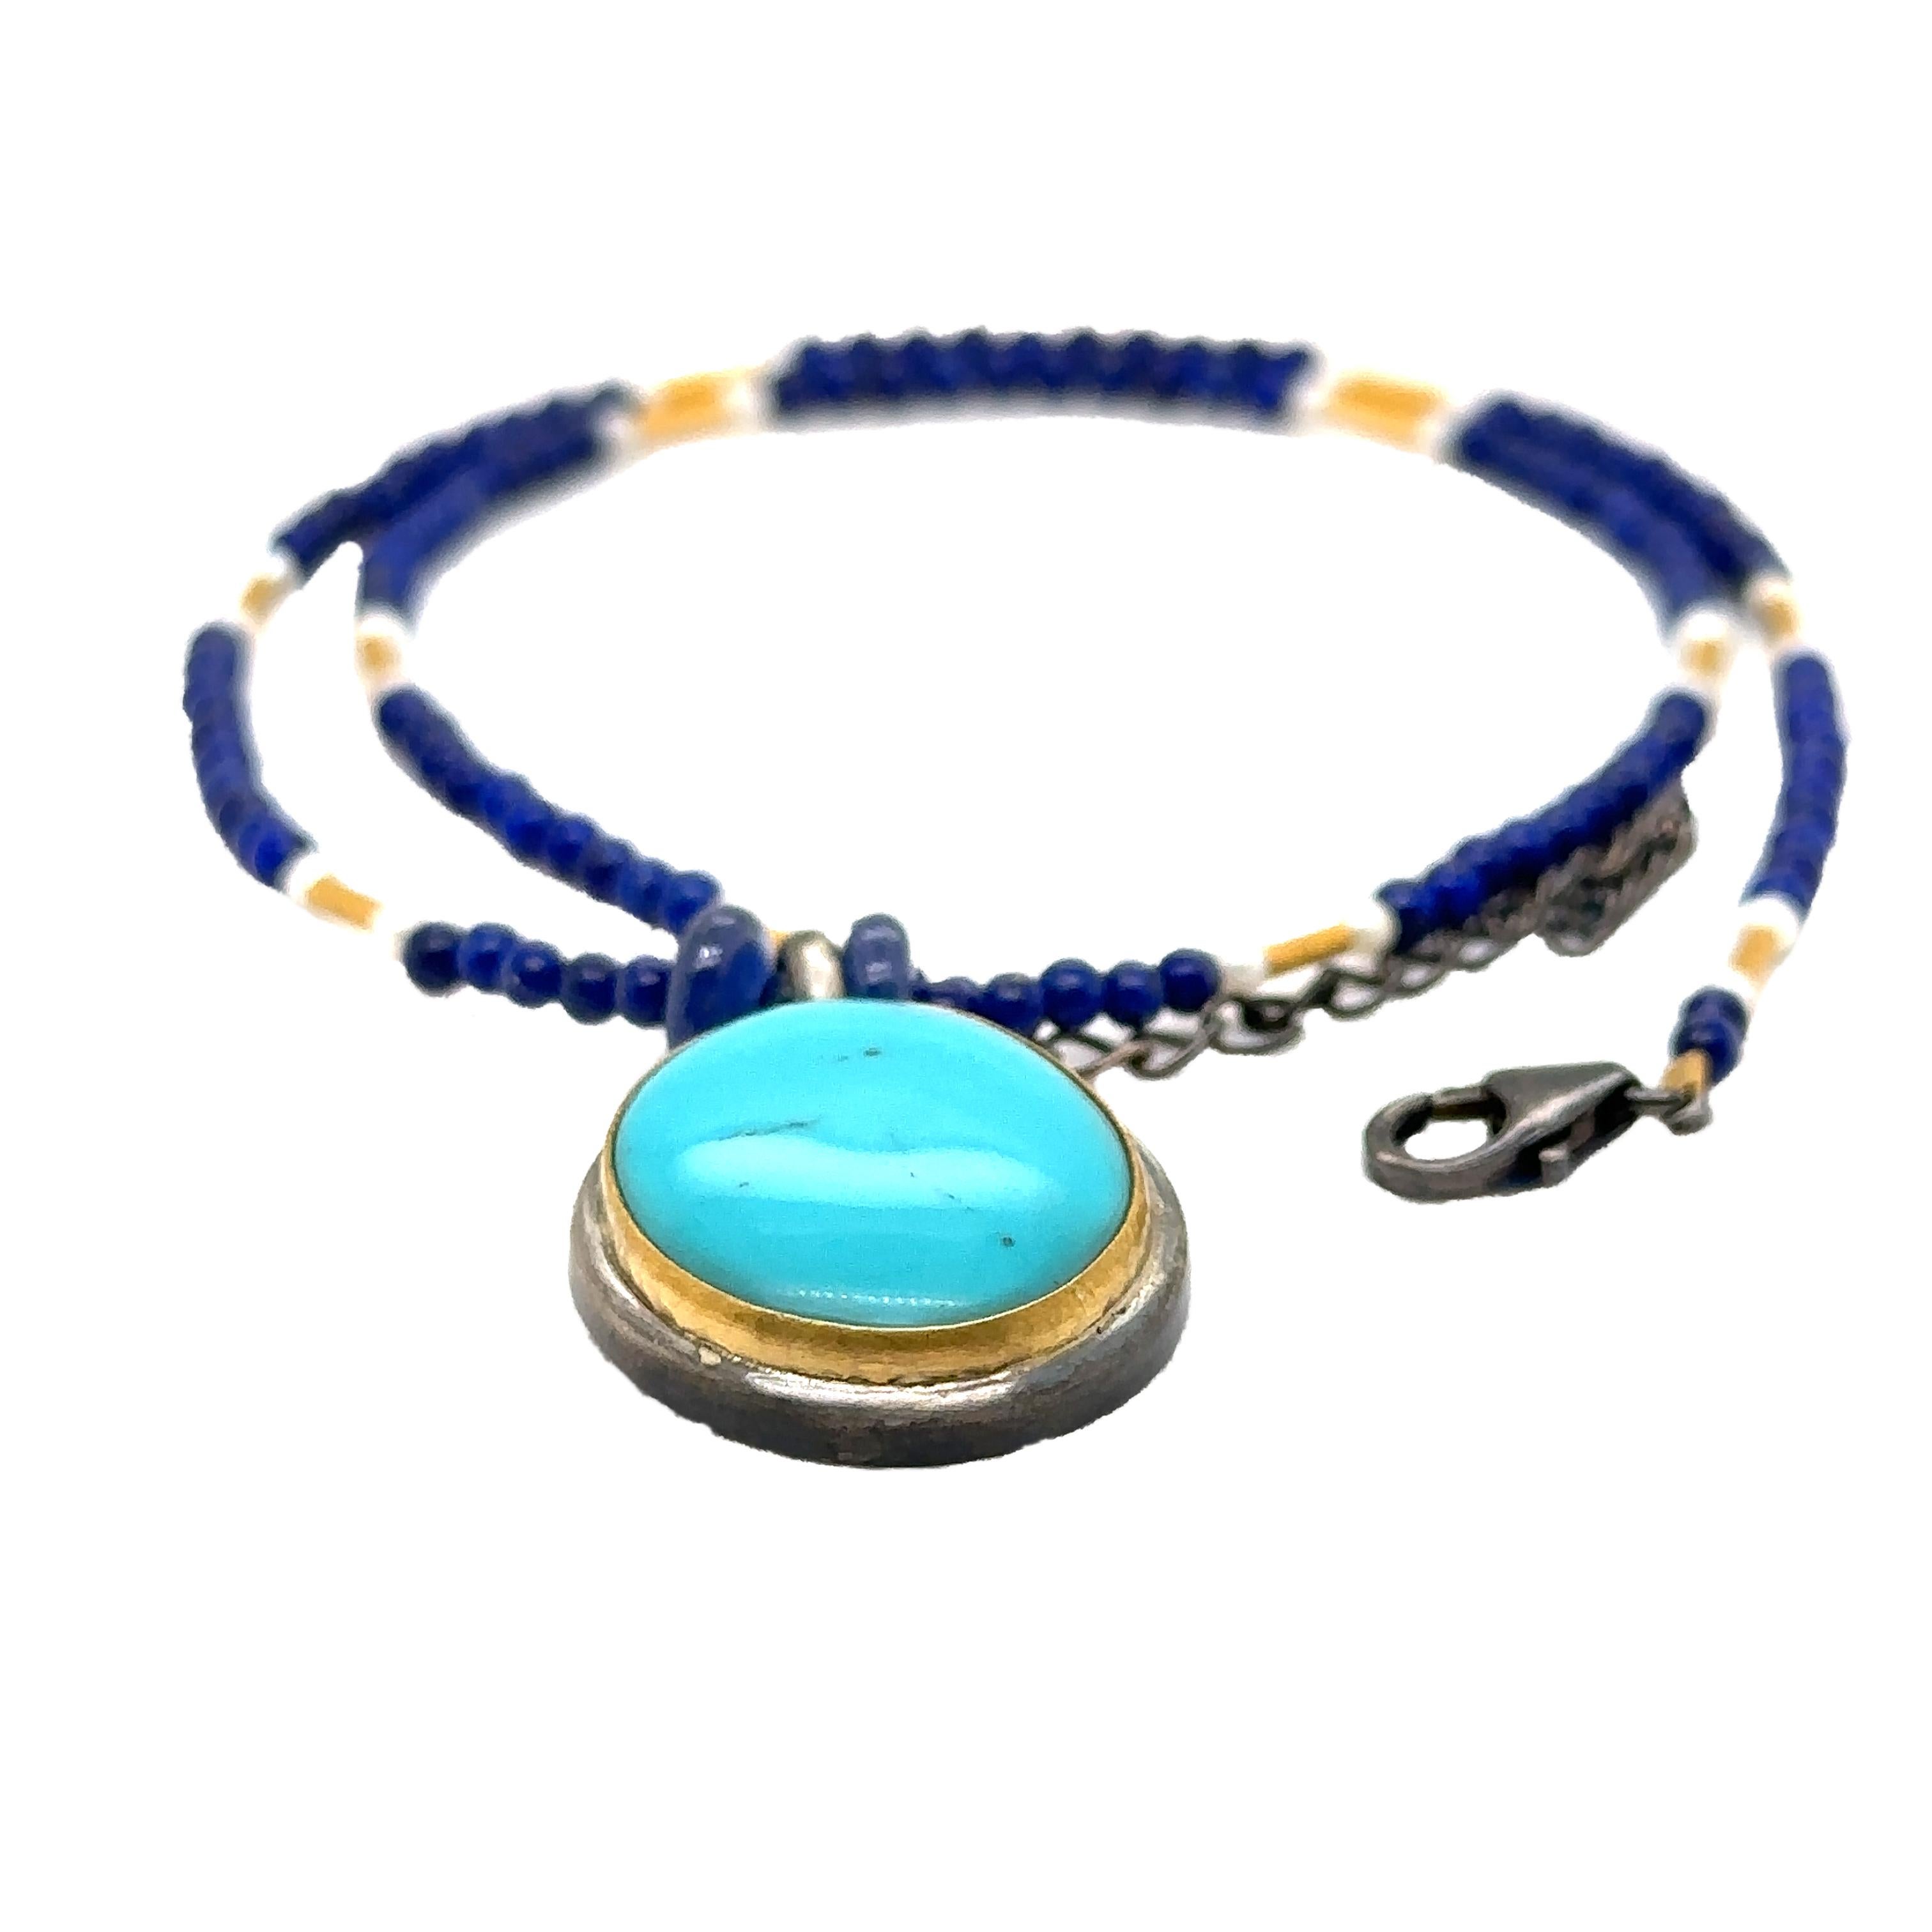 Cabochon JAS-19-1843 - 24K/SS HANDMADE 18” NECKLACE w 20X17MM NATURAL KINGMAN TURQUOISE For Sale